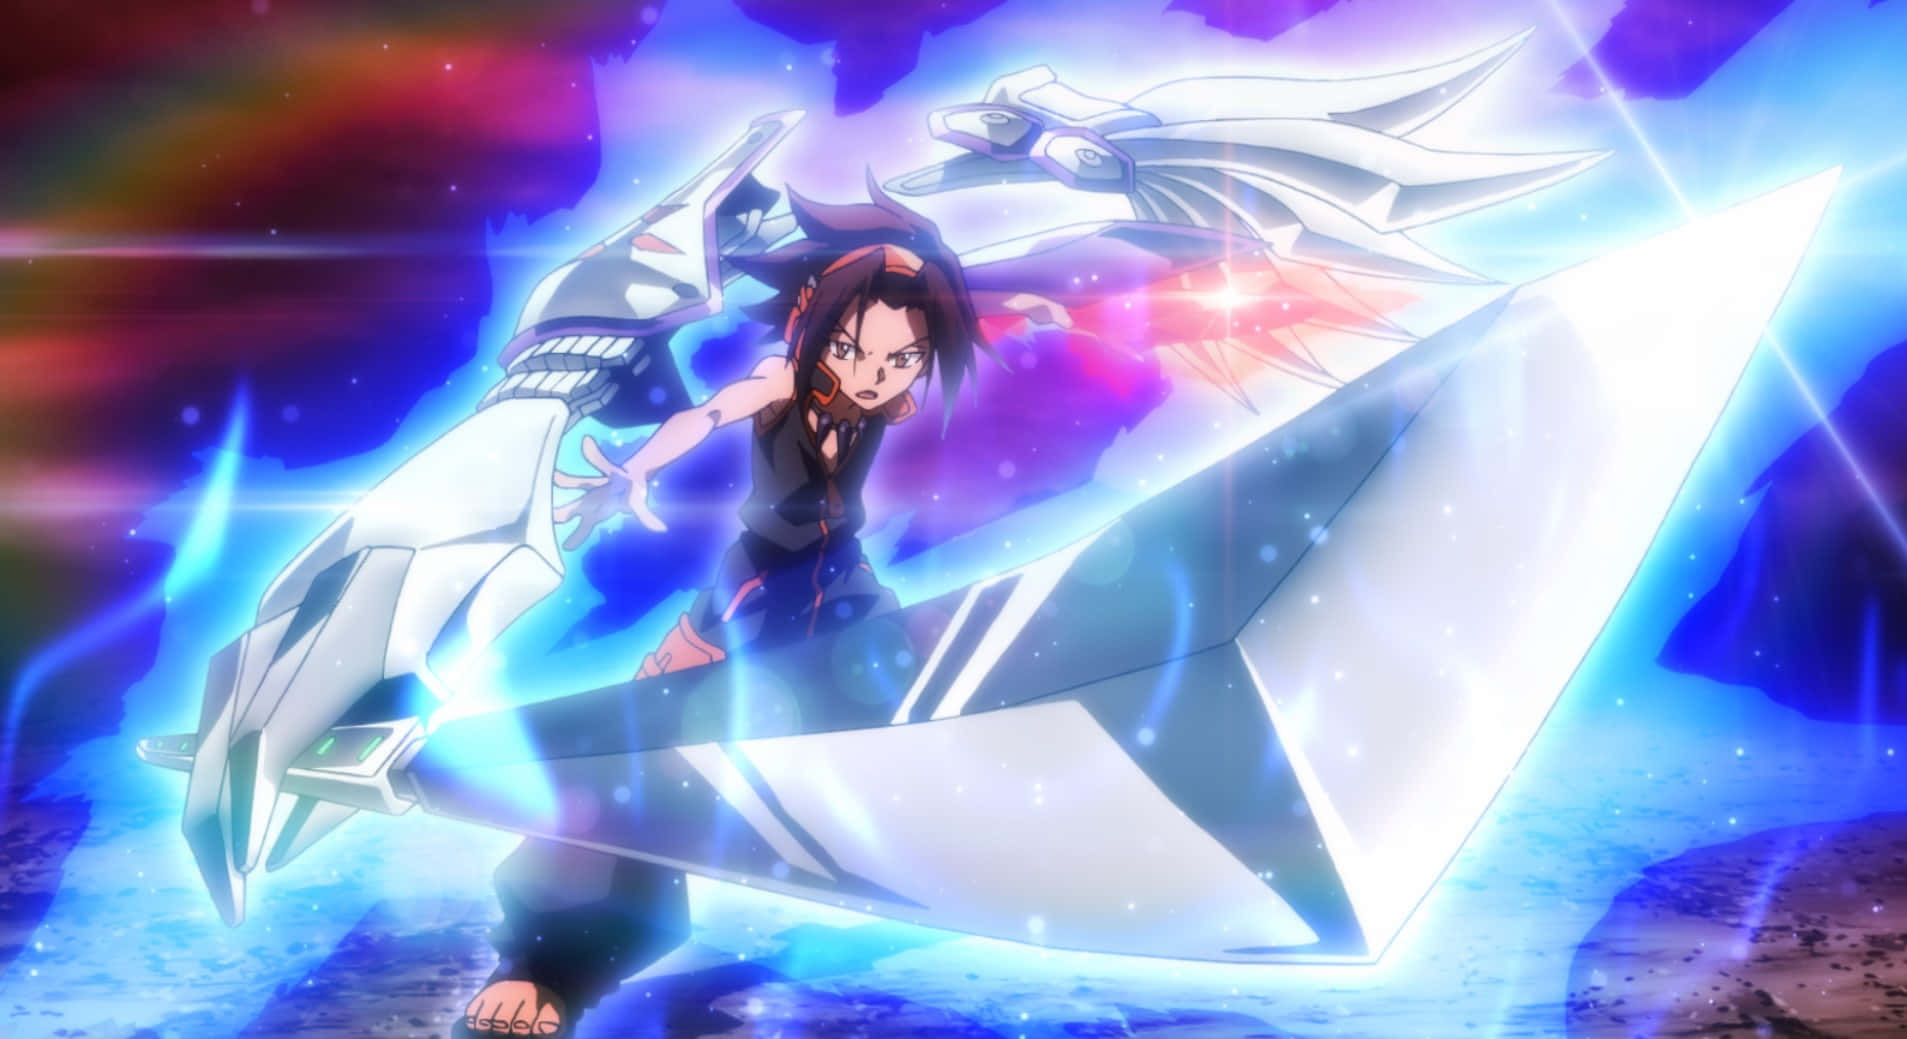 Follow your dreams with Shaman King